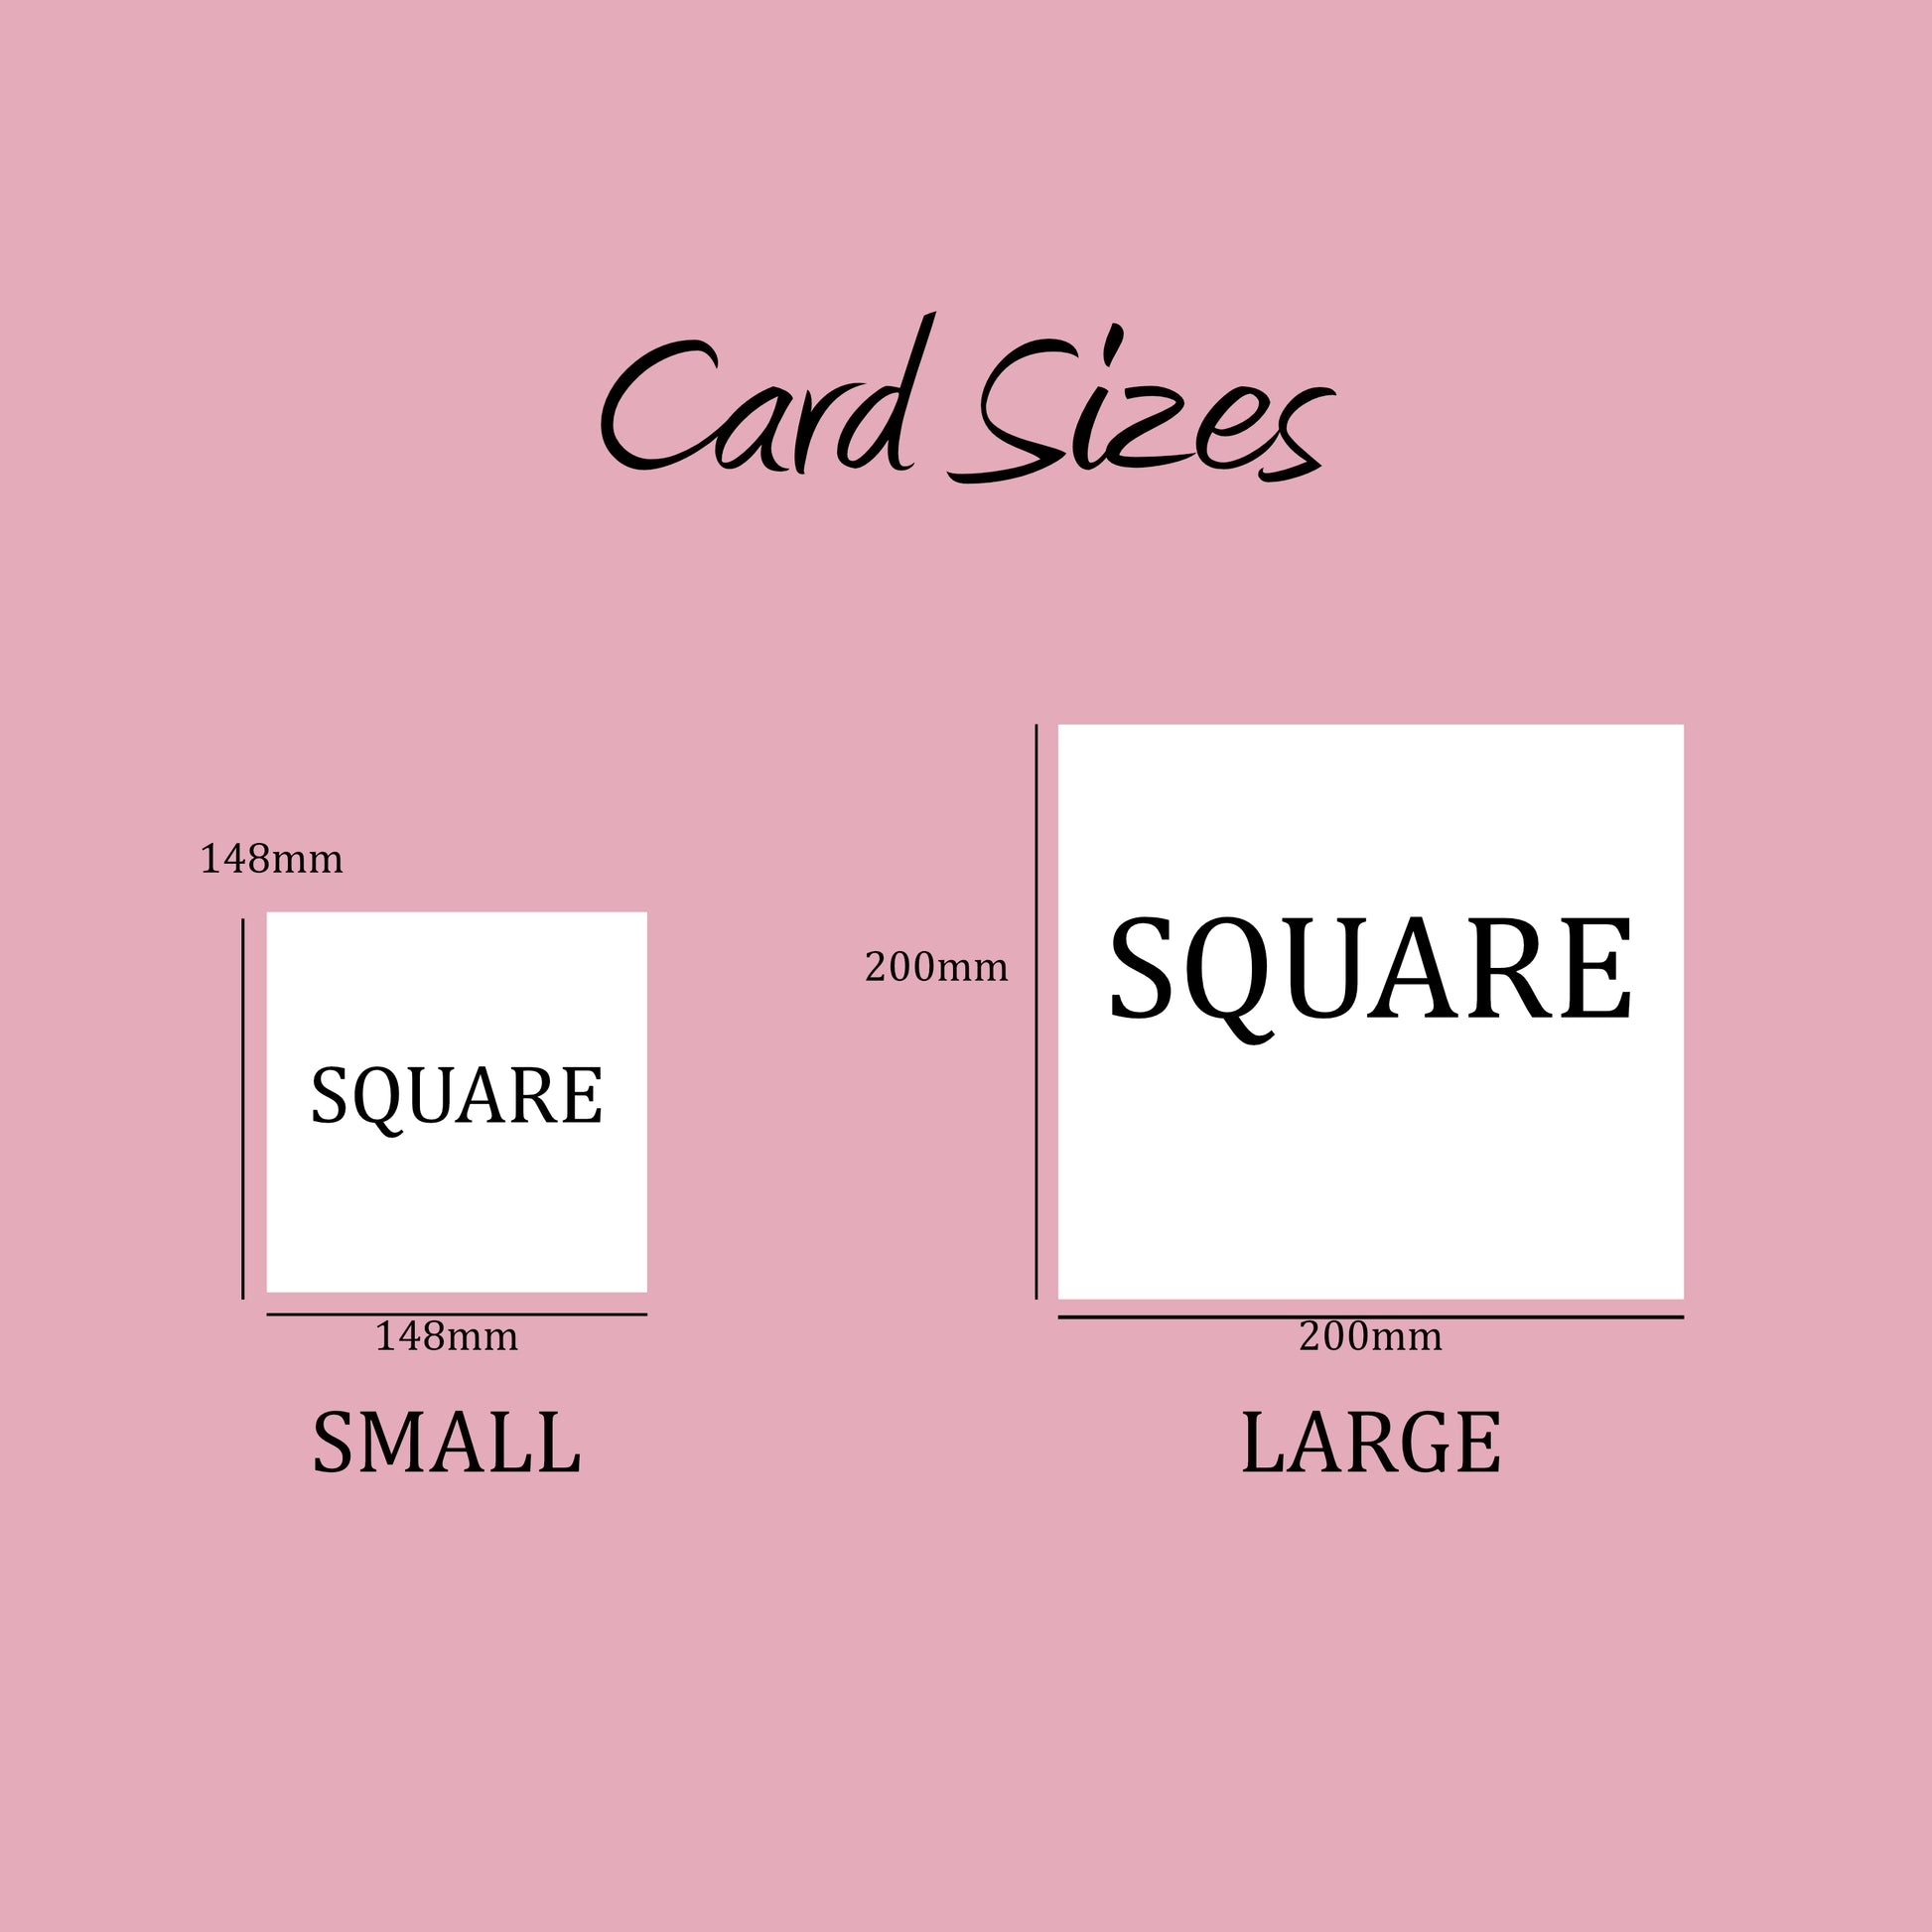 a pink background with a square and small size labels